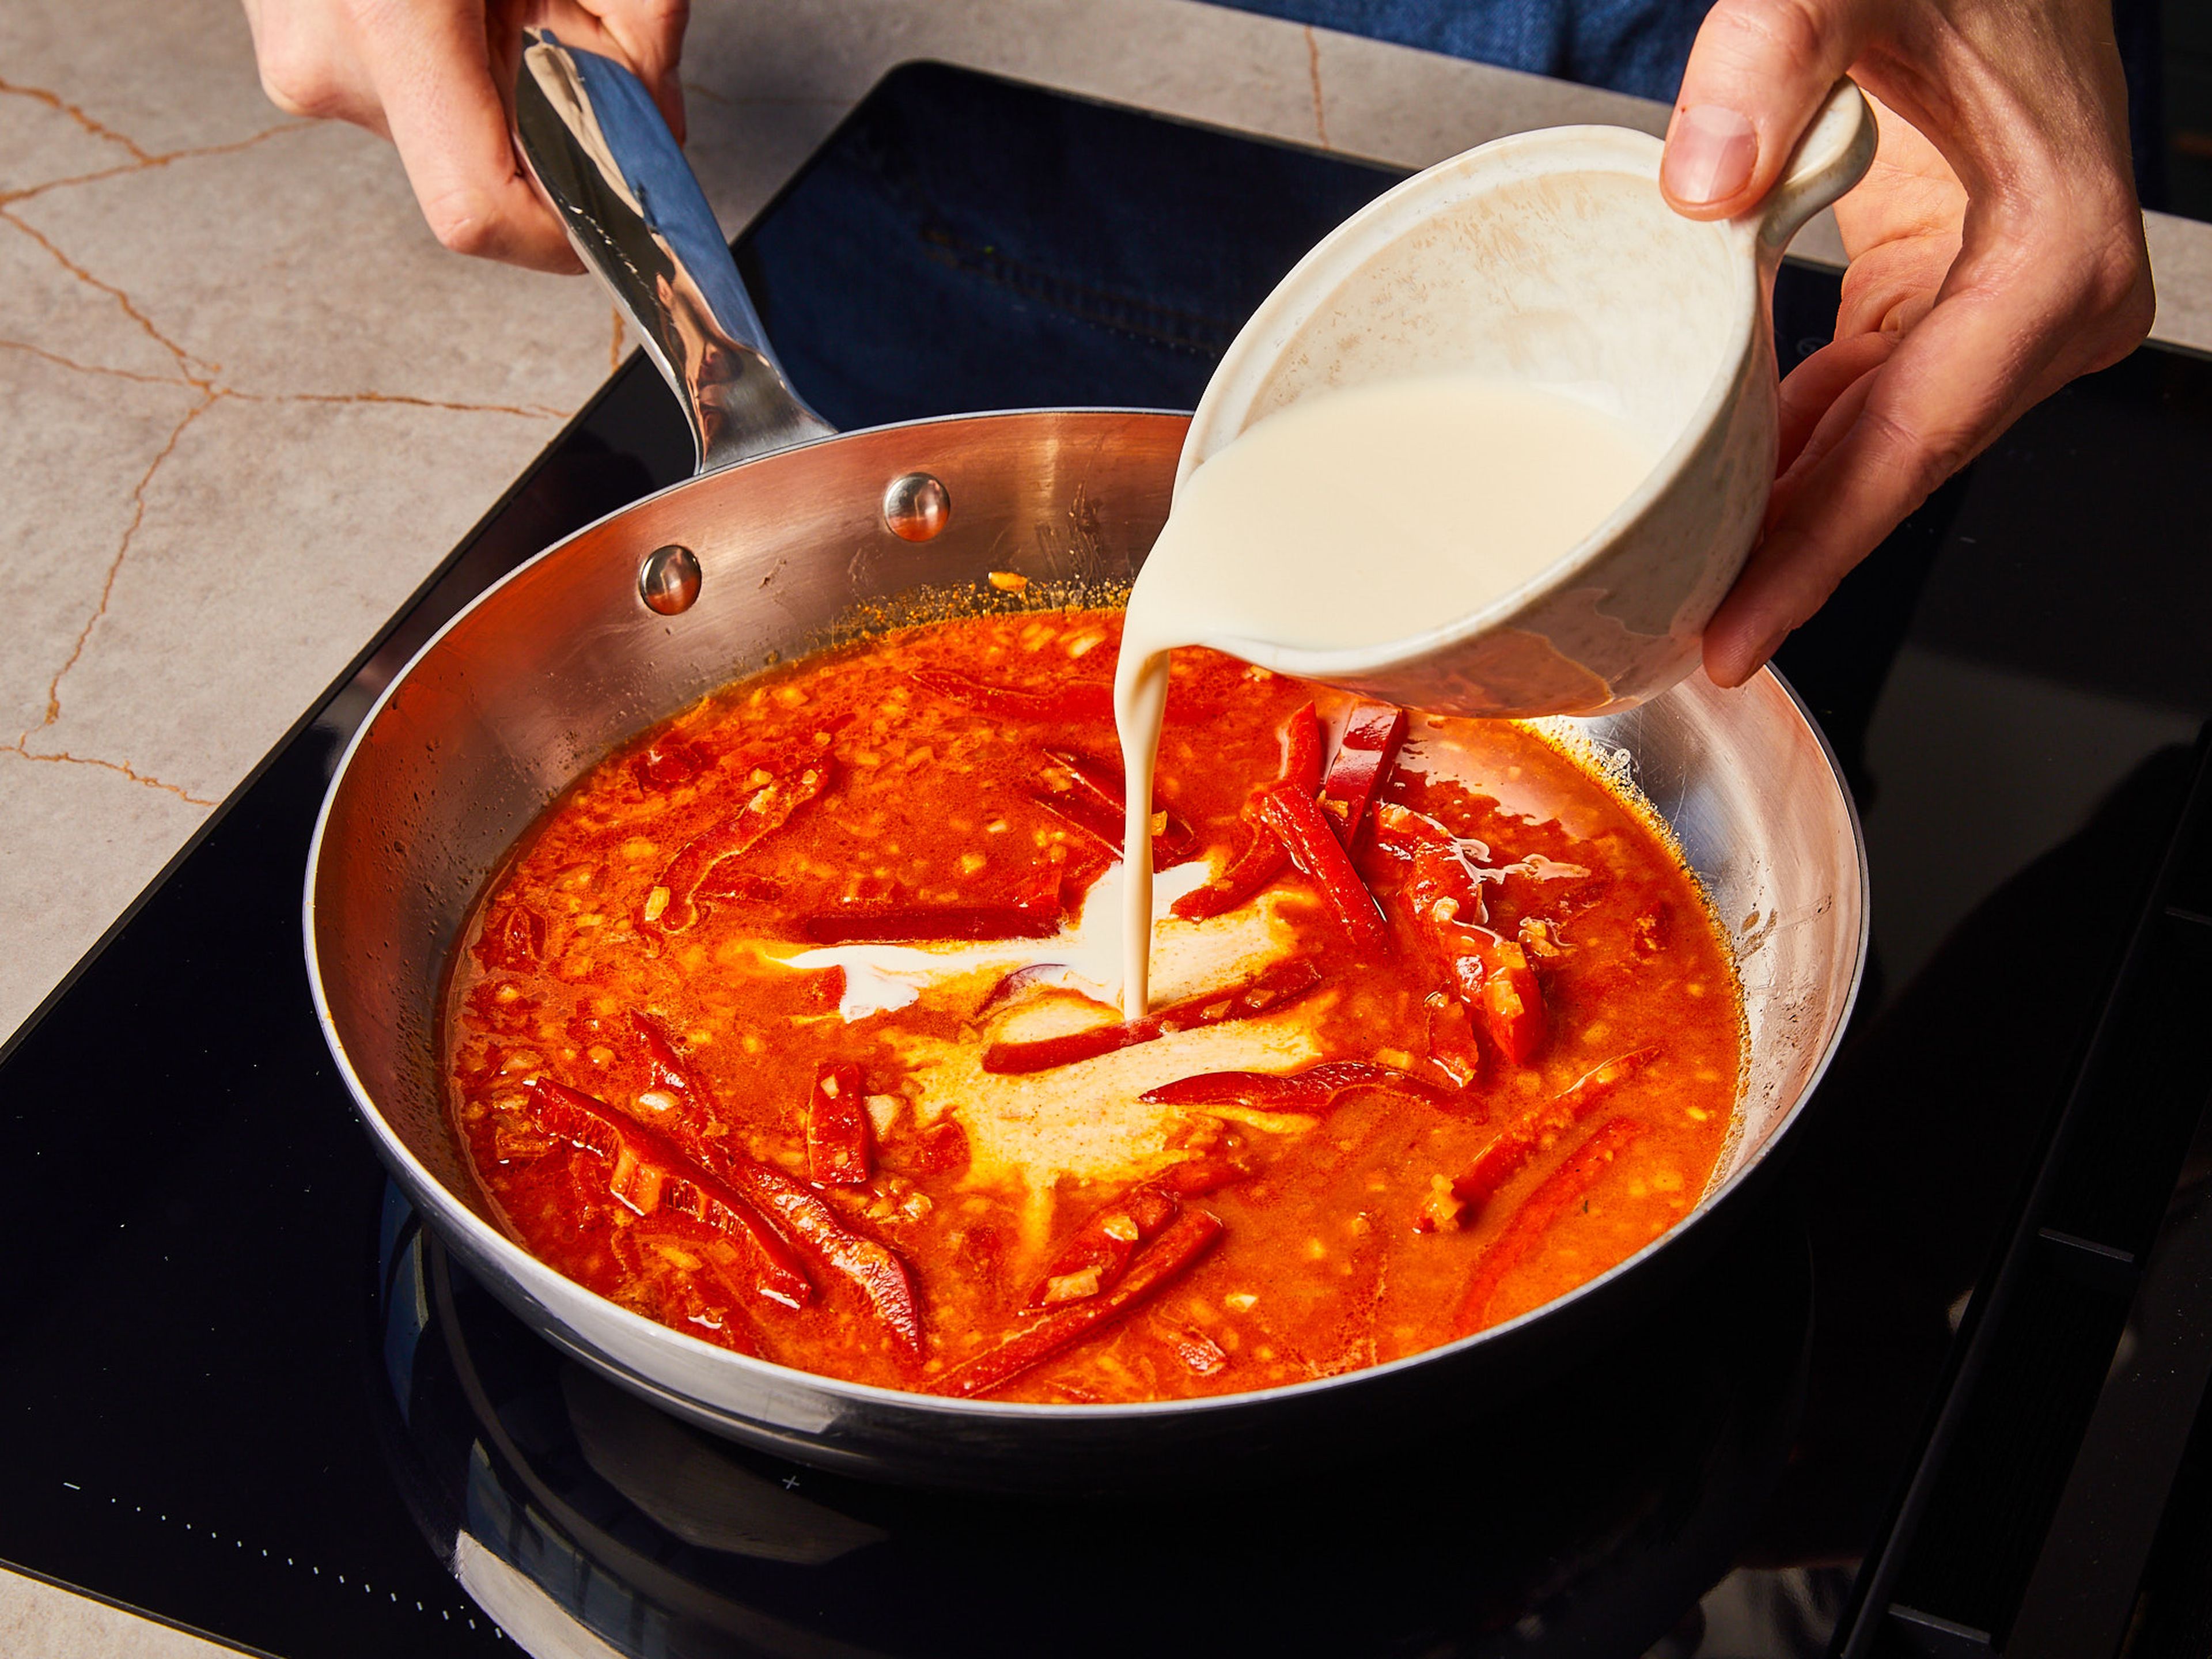 Add onion and pepper to the same pan and fry over medium heat for approx. 2 min. Add flour, sweet paprika, and spicy paprika. Then add chicken broth and cream. Bring everything to a simmer until a creamy sauce forms.